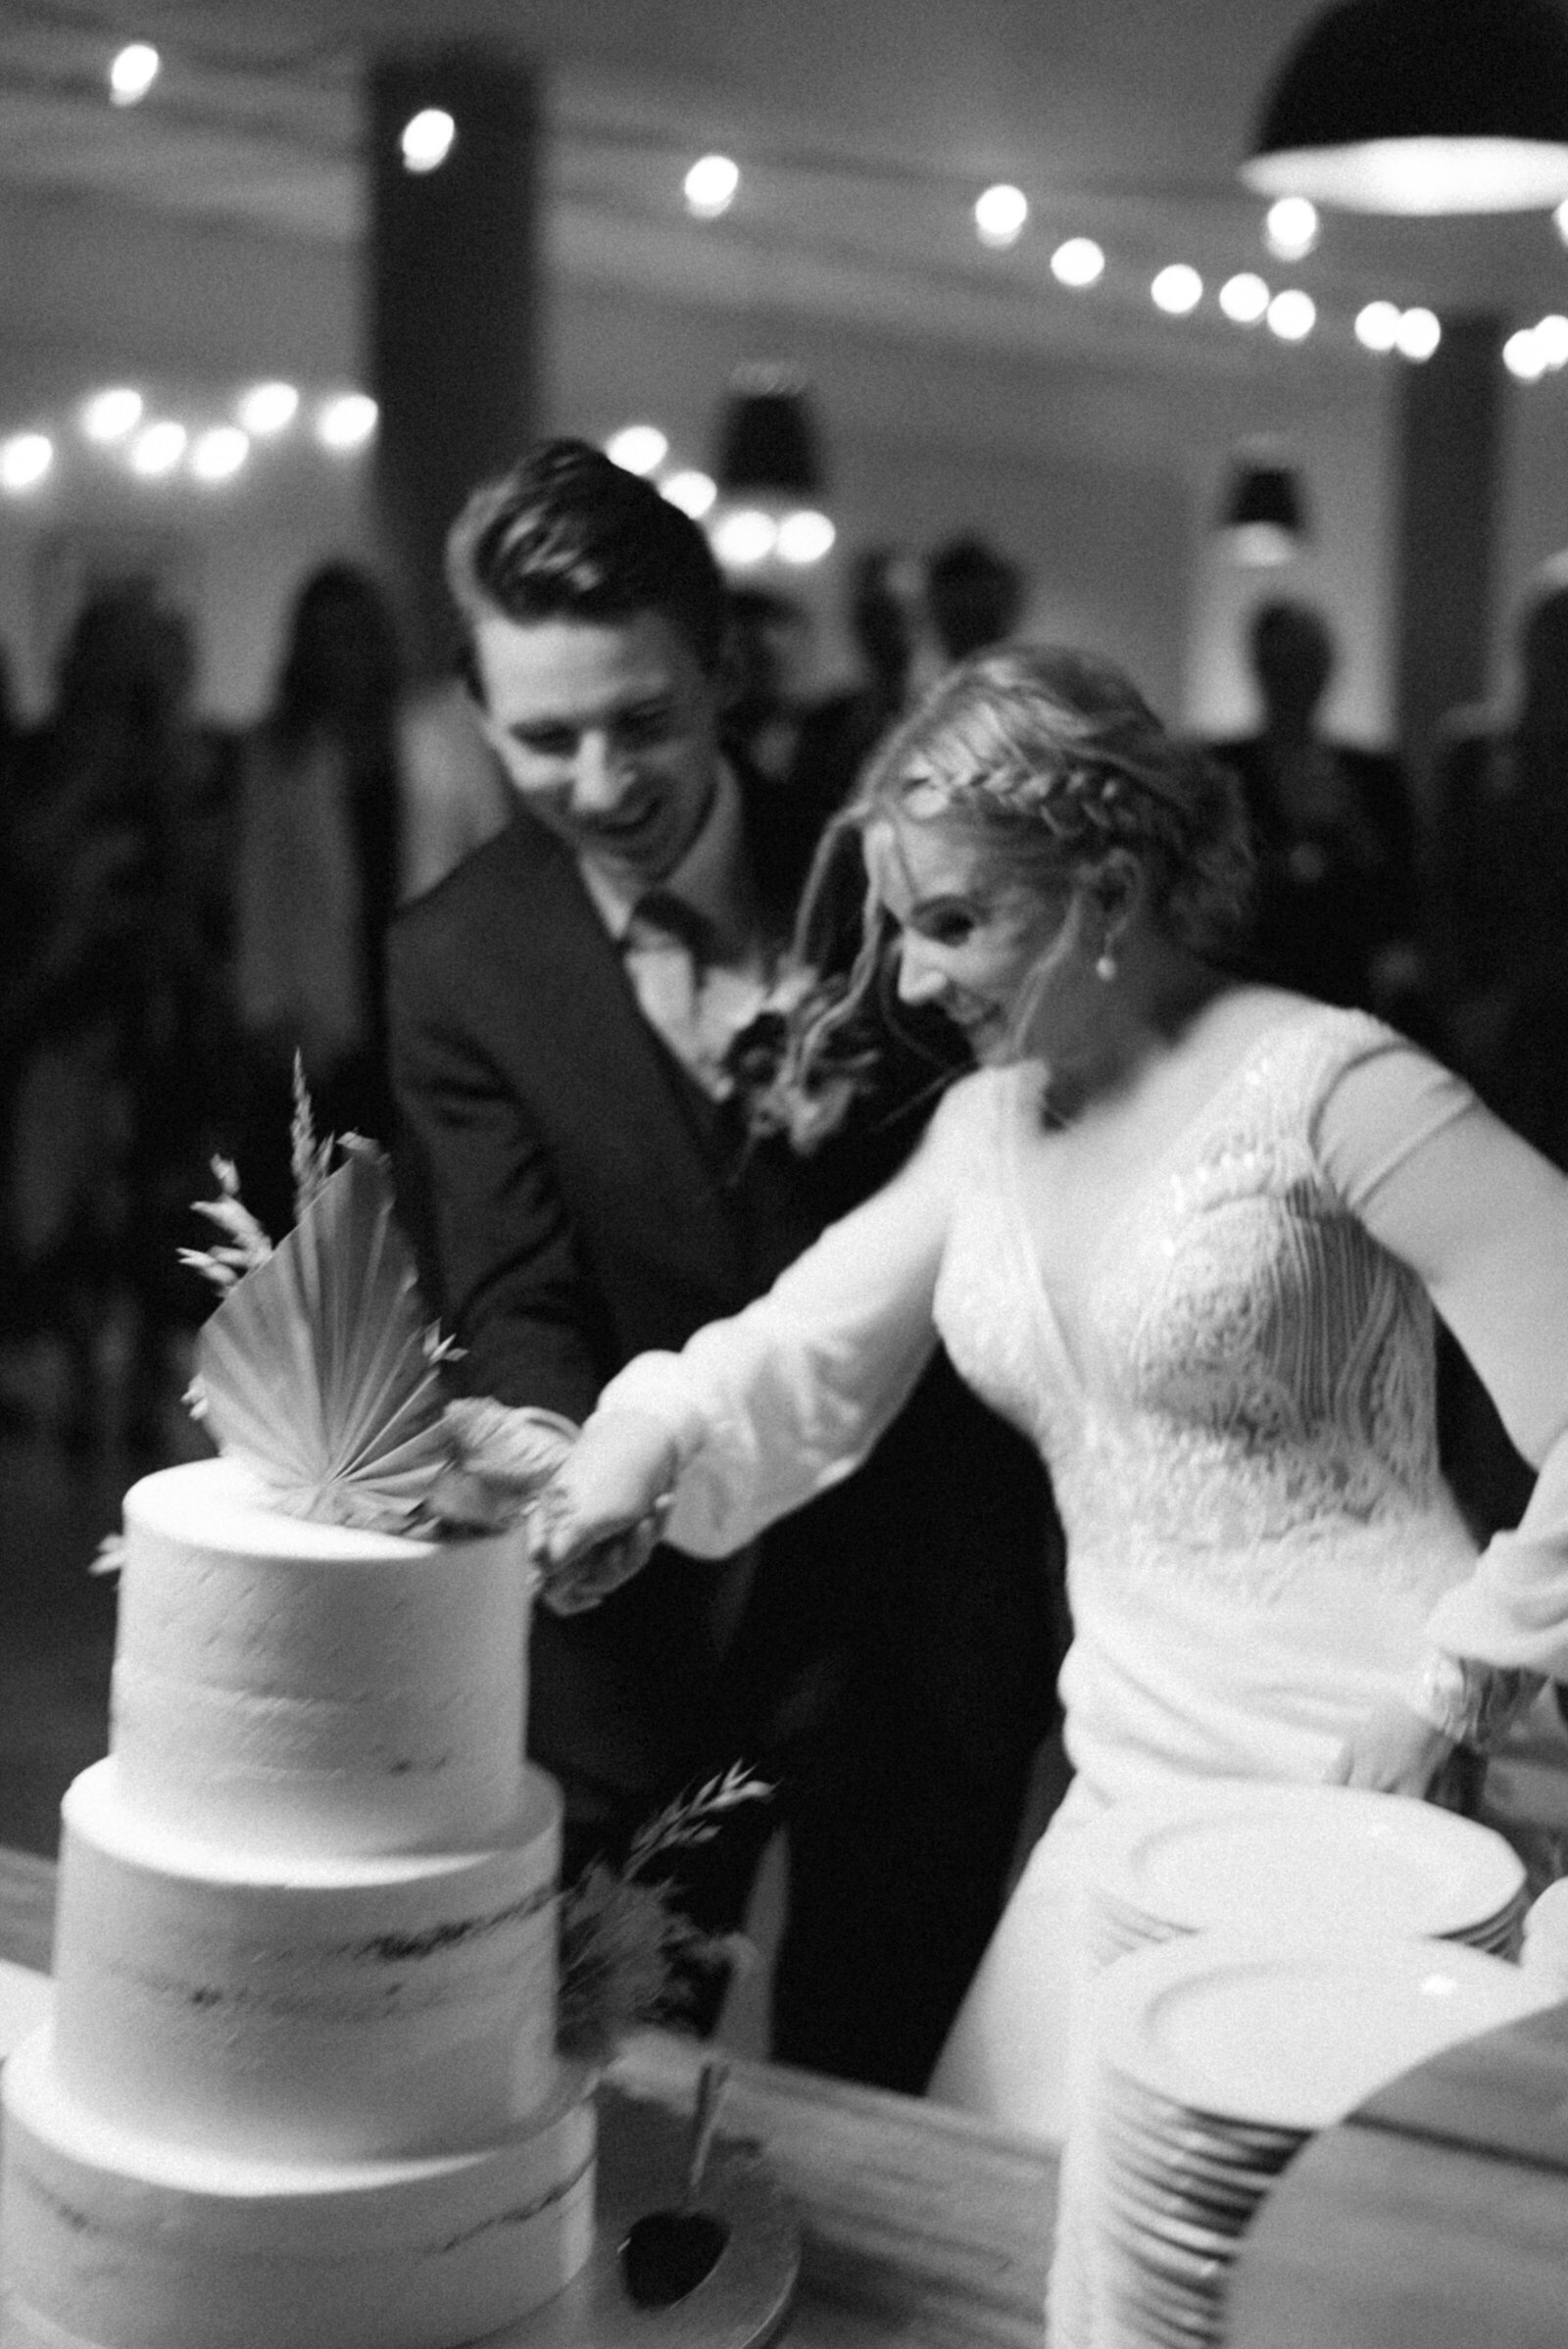 A documentary wedding  photo of the couple cutting the cake in Oitbacka gård captured by wedding photographer Hannika Gabrielsson in Finland